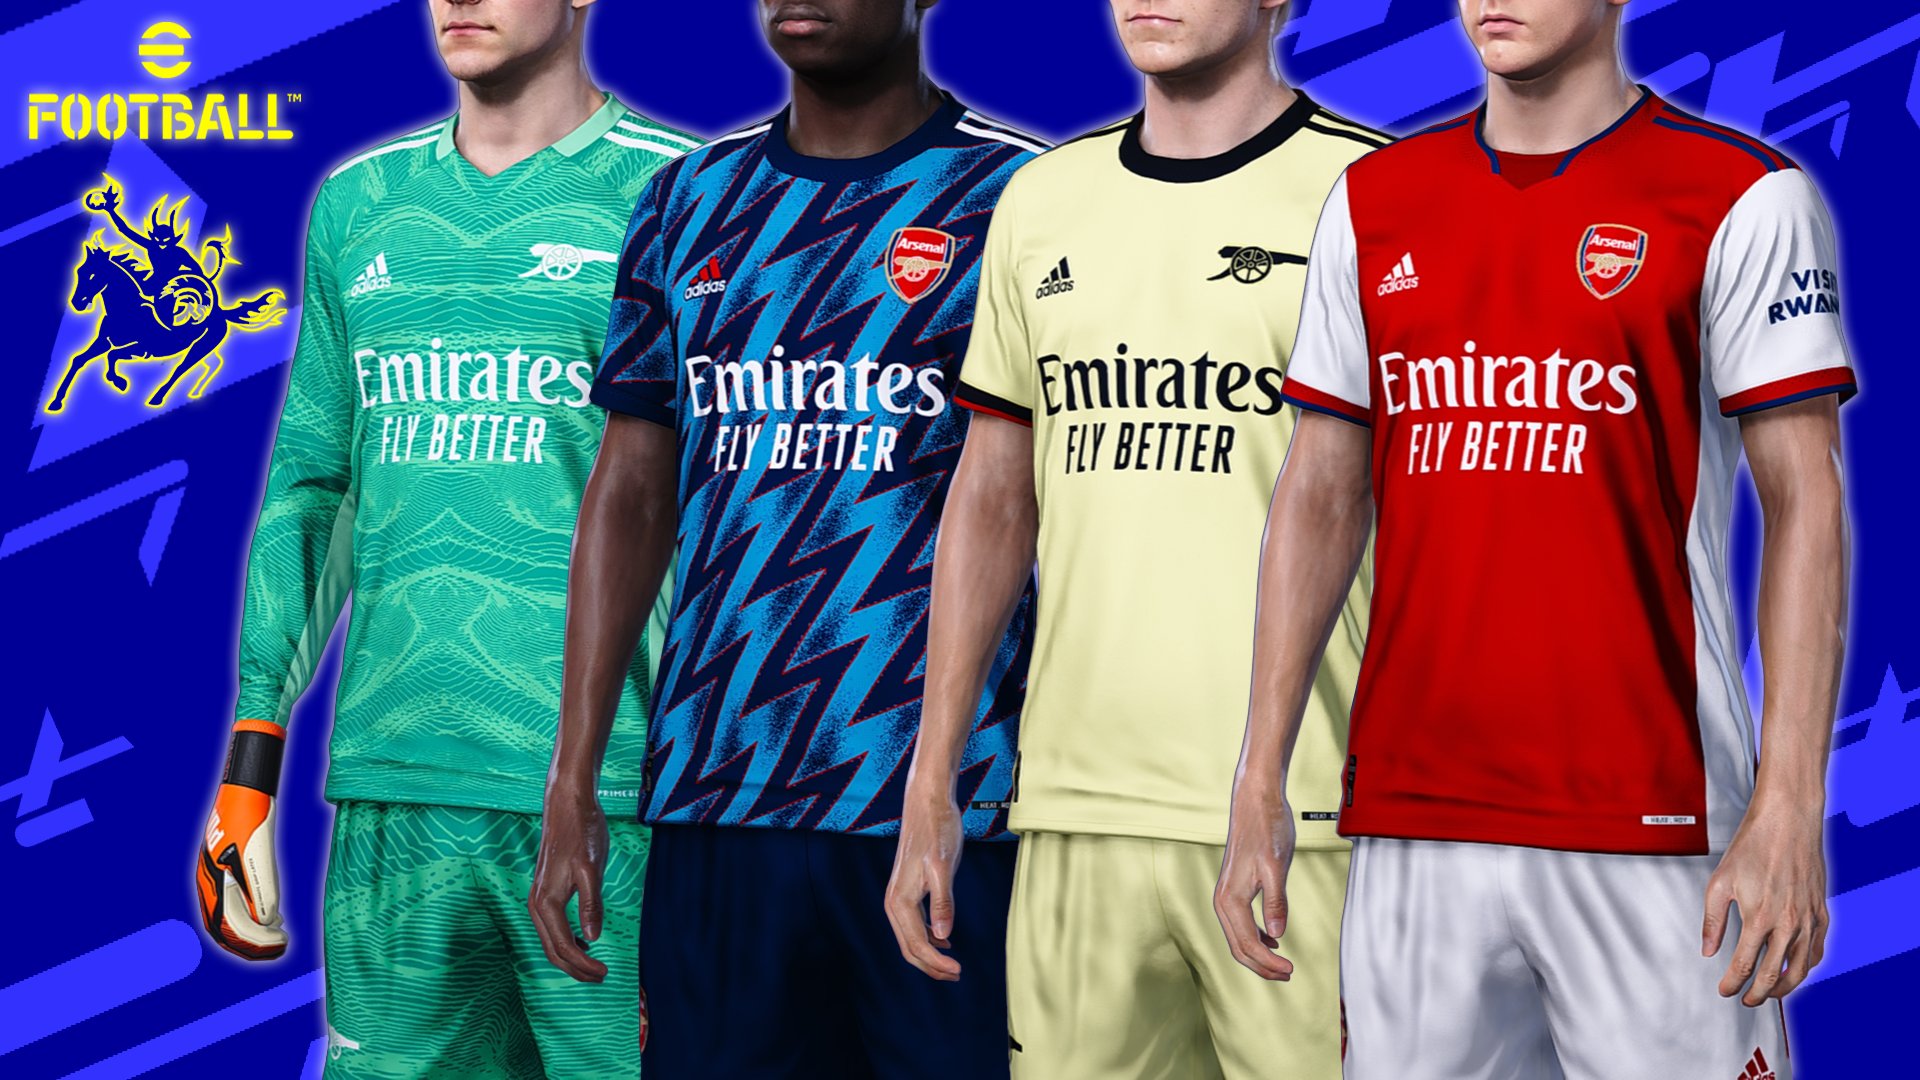 MARCUS on Twitter: "🔴Arsenal Home /Away /Third /GK kit 21-22🔴 "download  from here" --------------------- https://t.co/ERnL6IQMTX  --------------------- I hope you like it. Greetings!! You can find it on my  Google Drive account! @Arsenal #